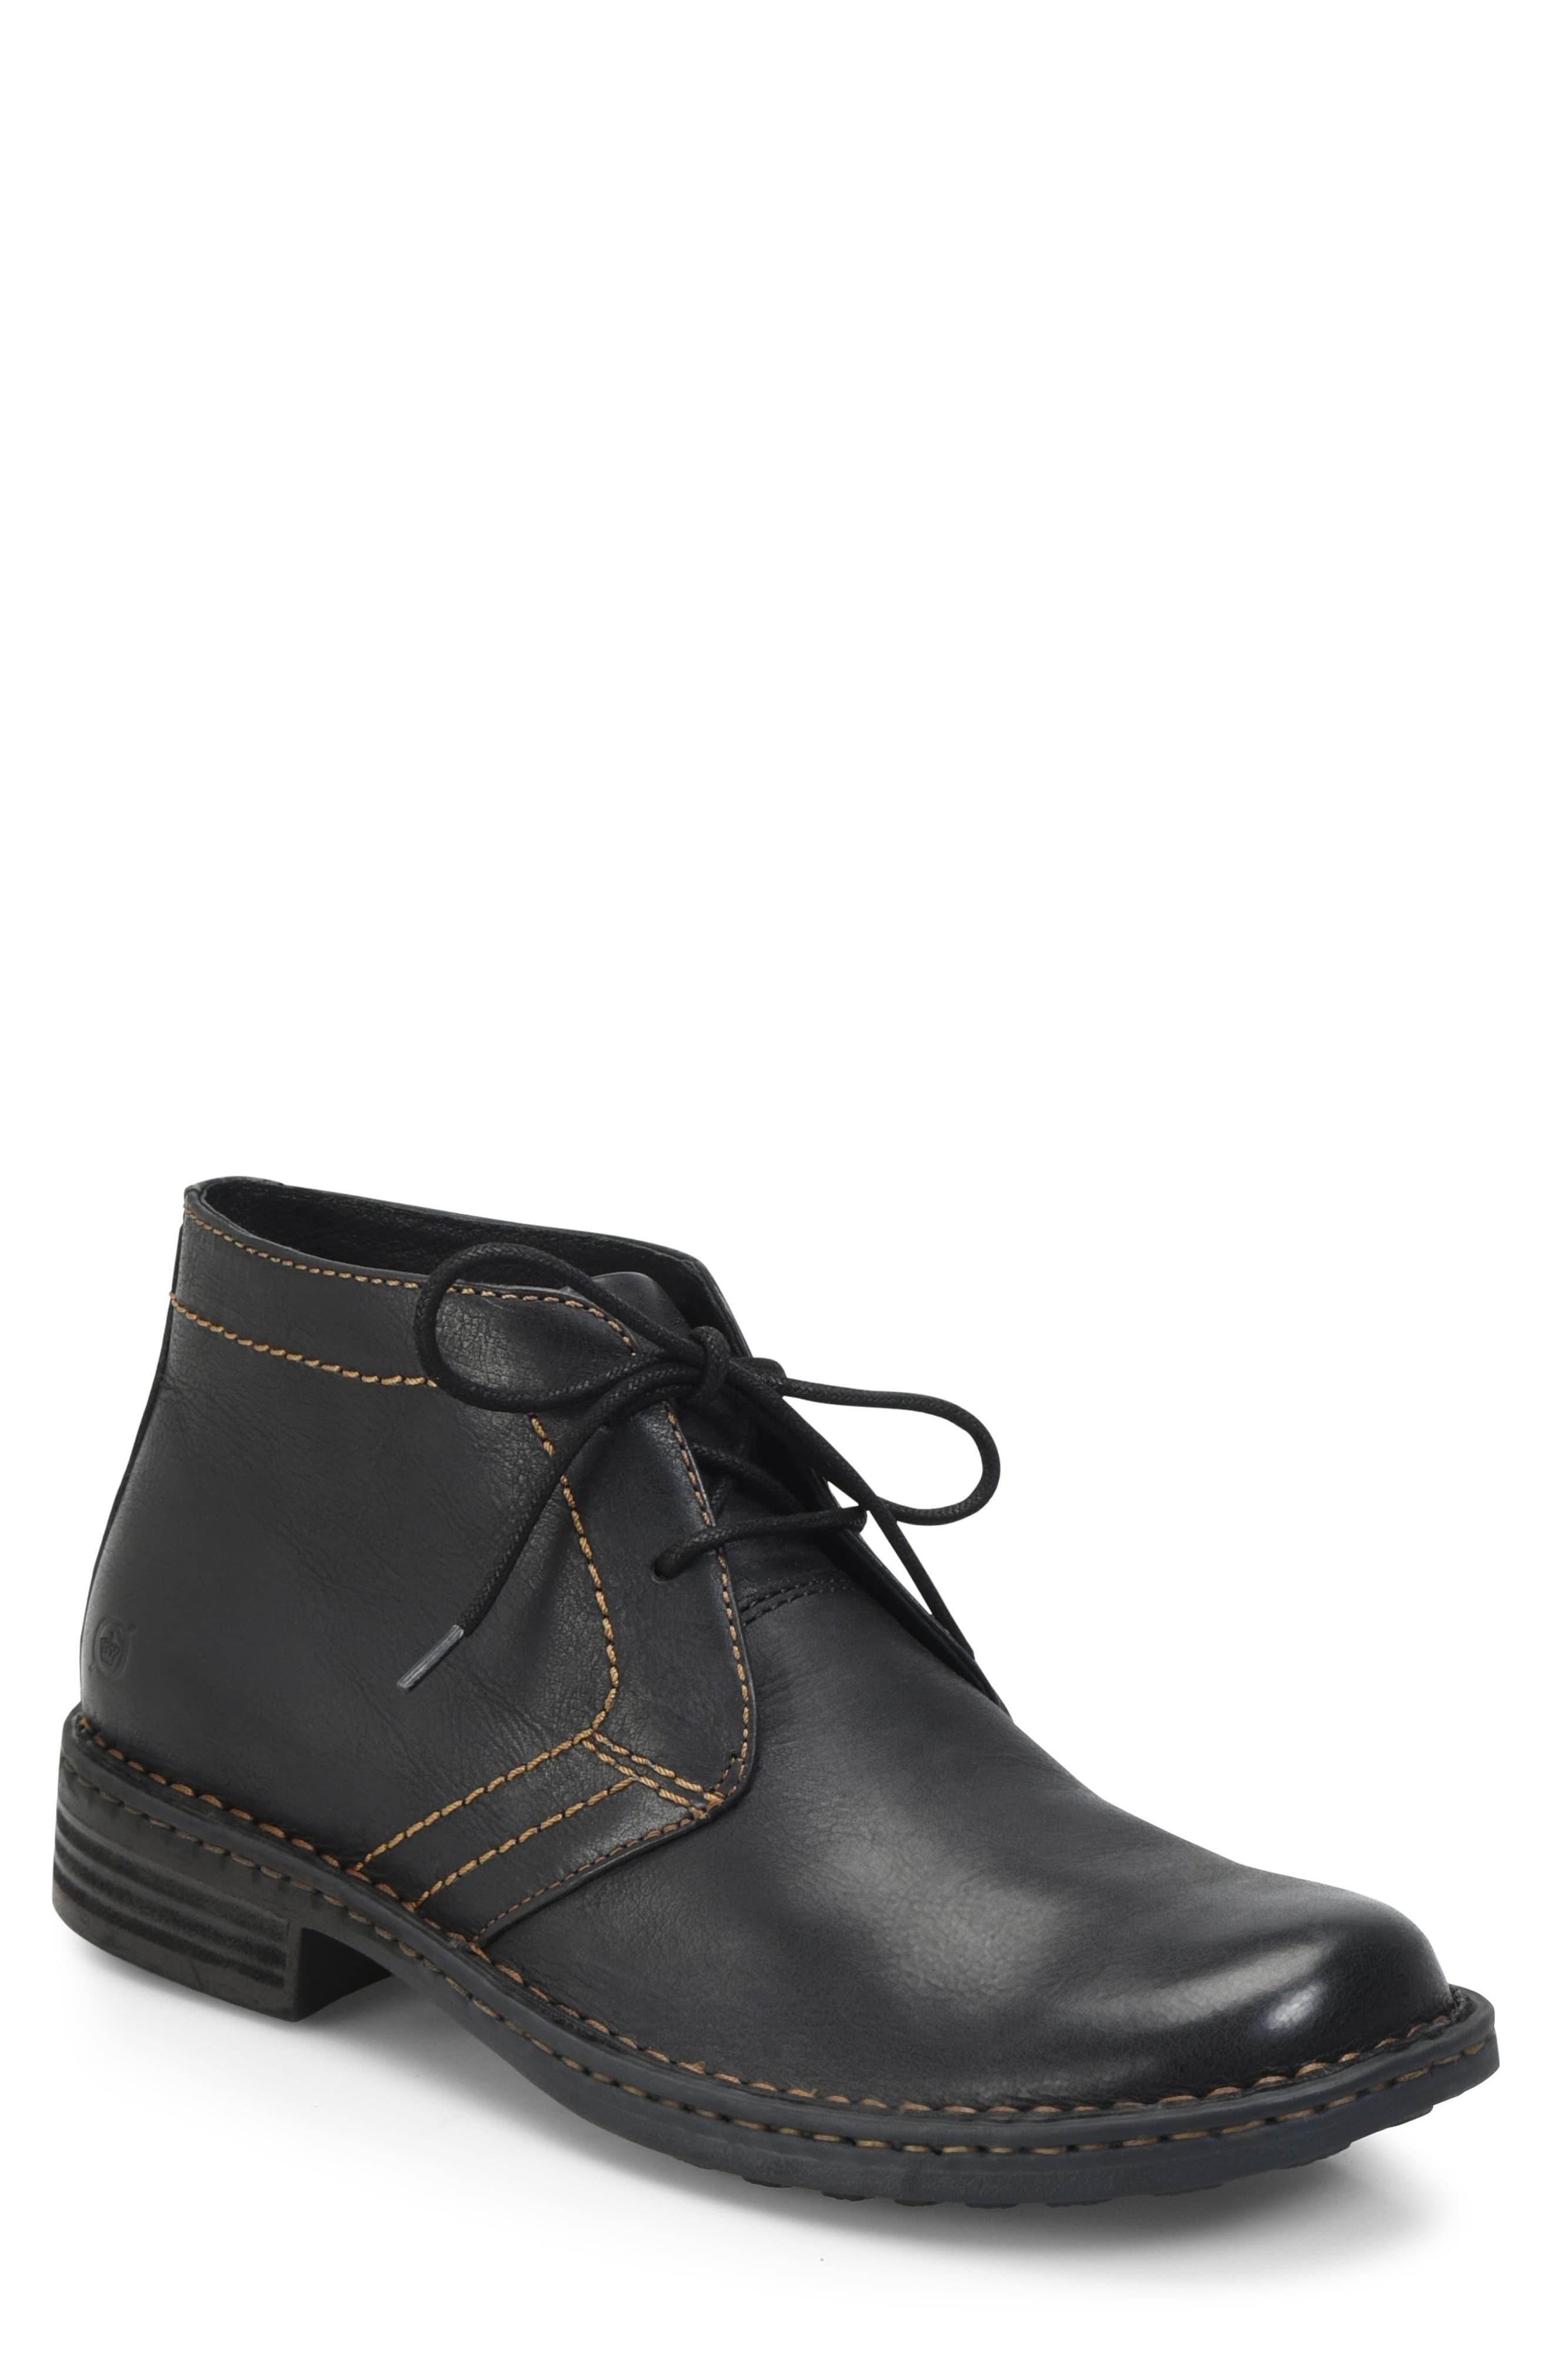 Born Leather Børn 'harrison' Chukka Boot in Black Leather (Black) for ...